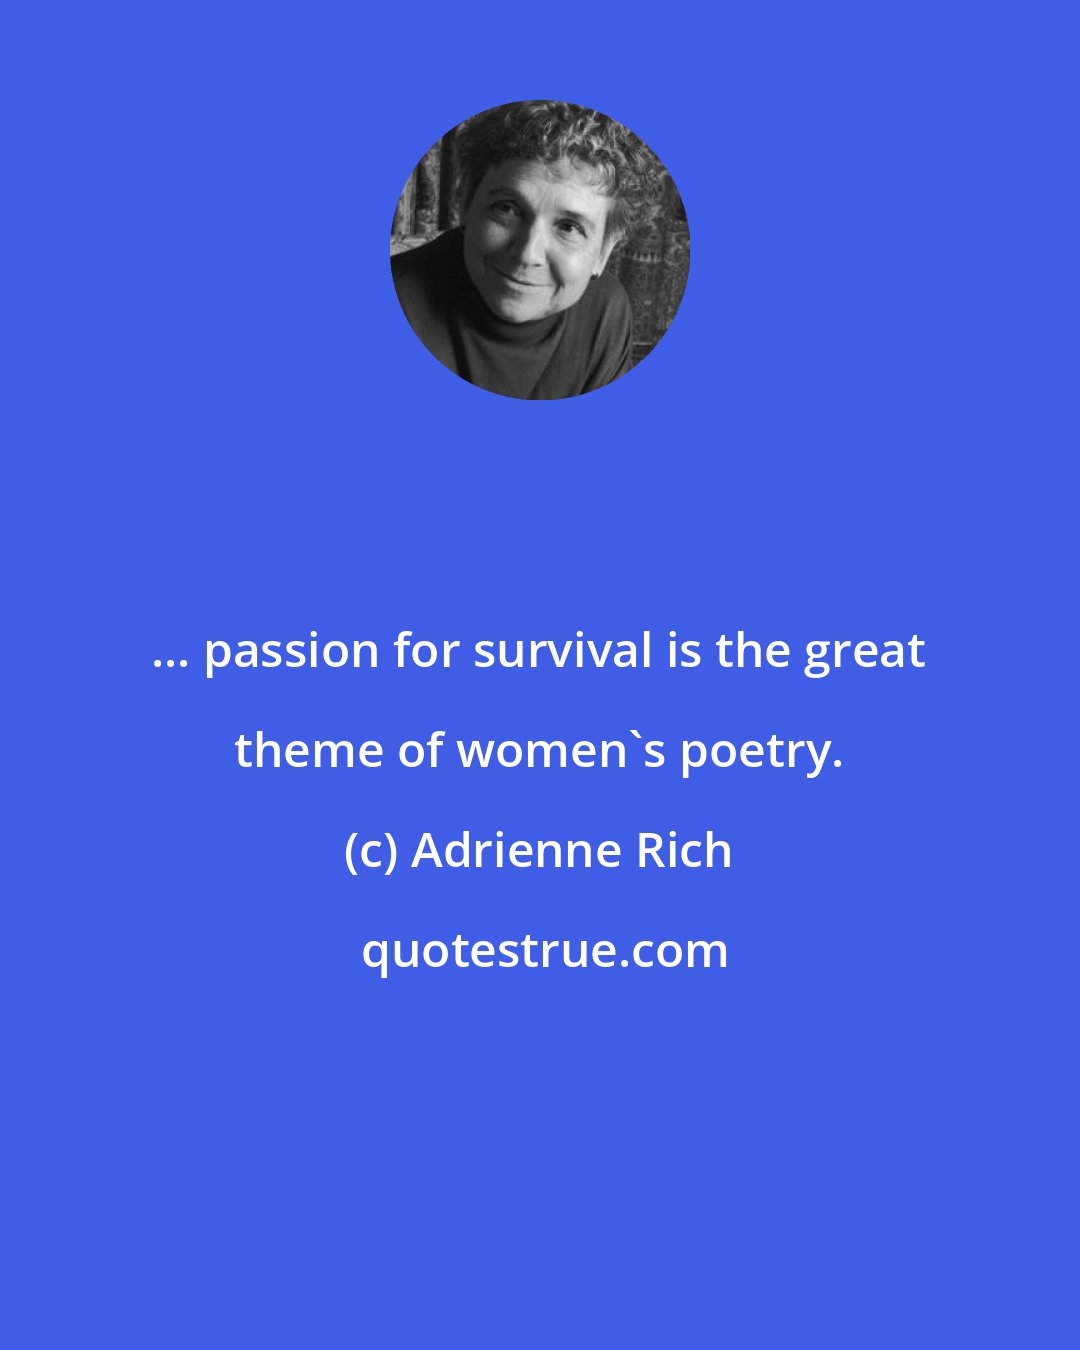 Adrienne Rich: ... passion for survival is the great theme of women's poetry.